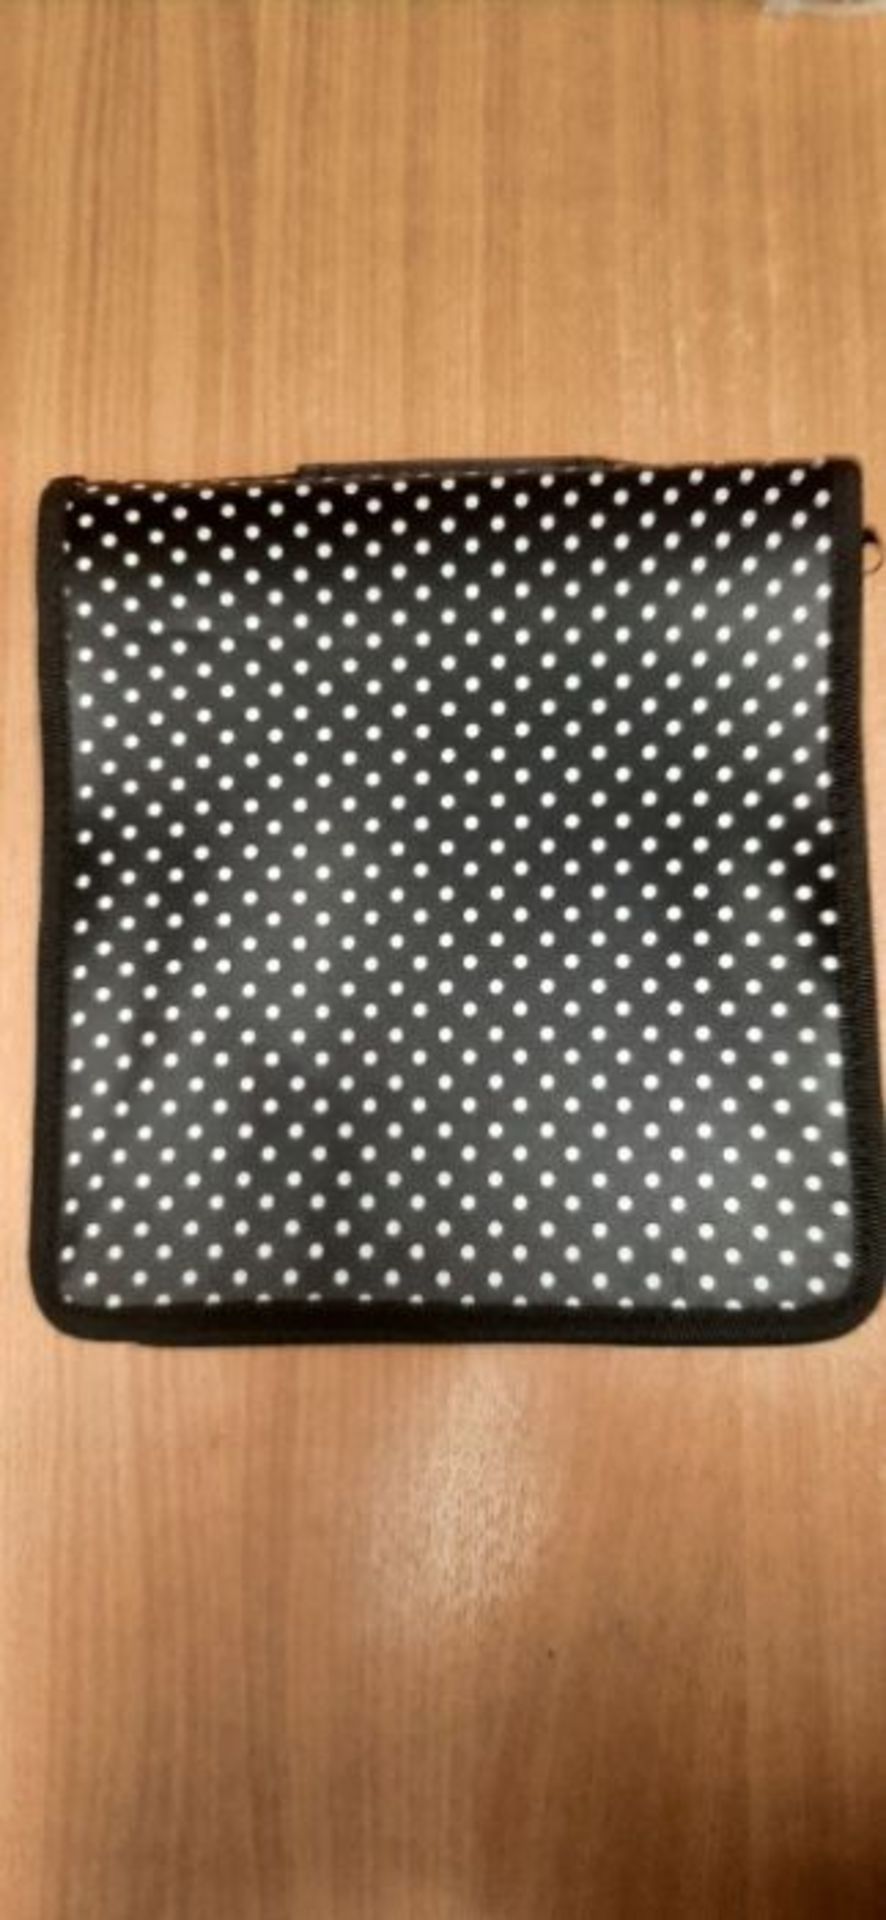 docrafts Papermania Stamp and Die Black Polka Dot Storage Case with 10 Pockets Contain - Image 2 of 2